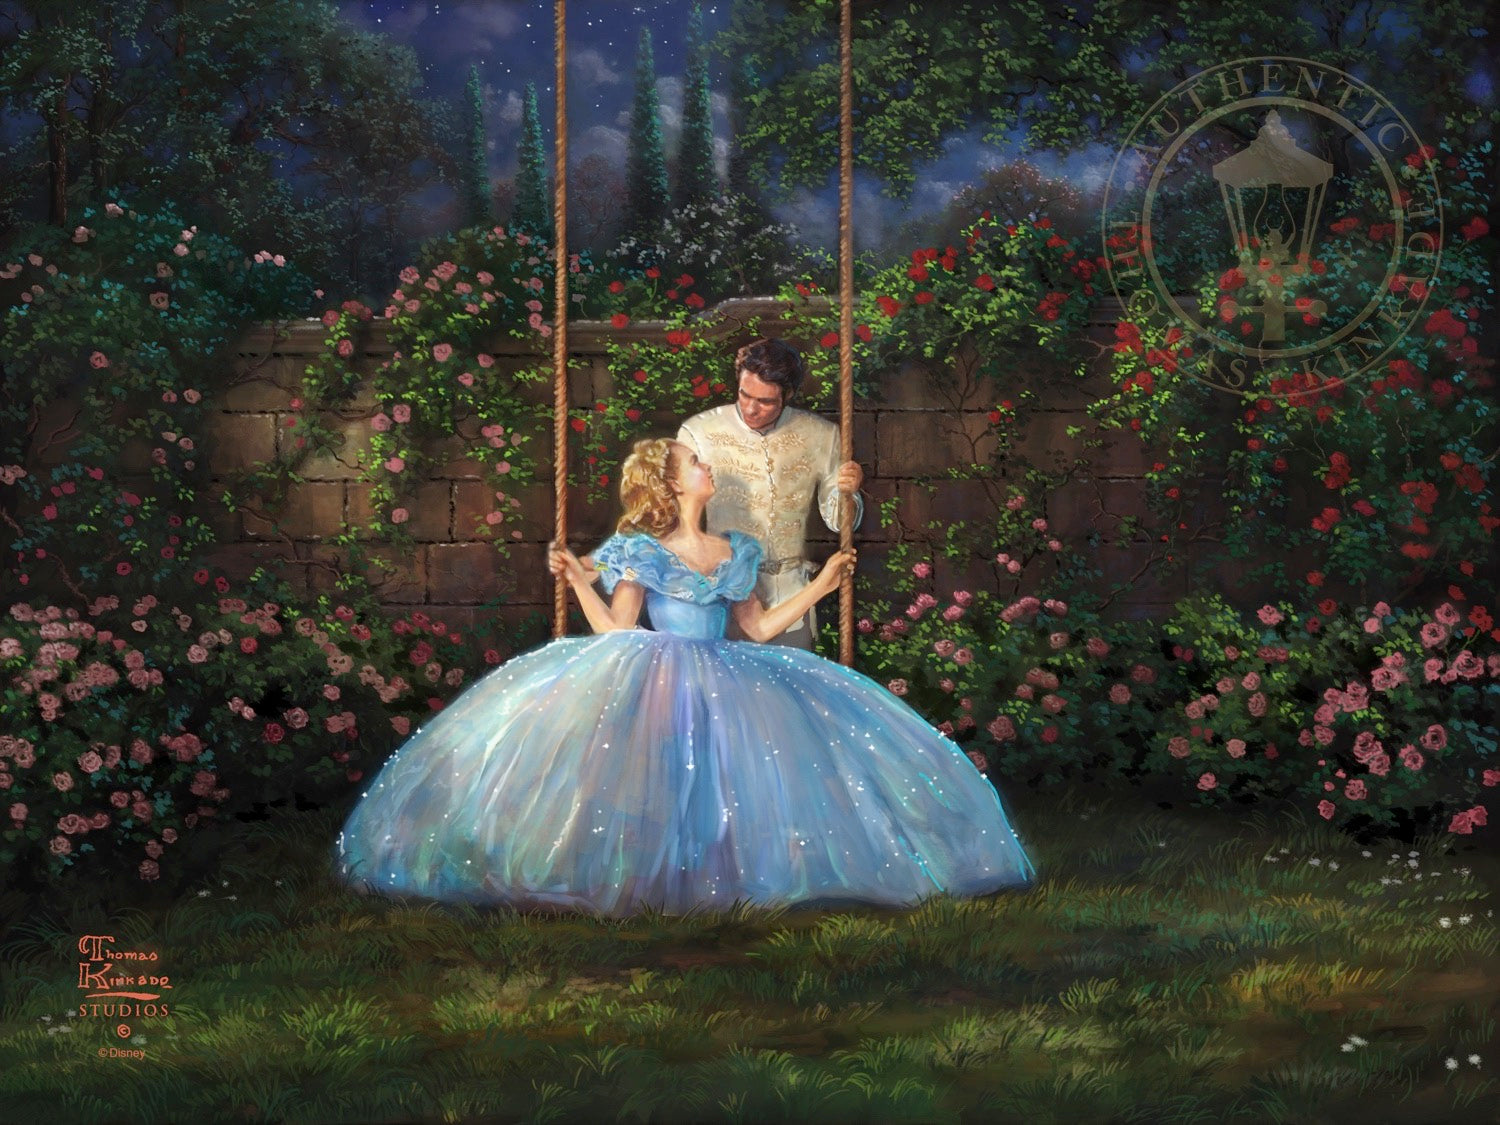 Cinderella sits in the garden swing with the Prince. Unframed